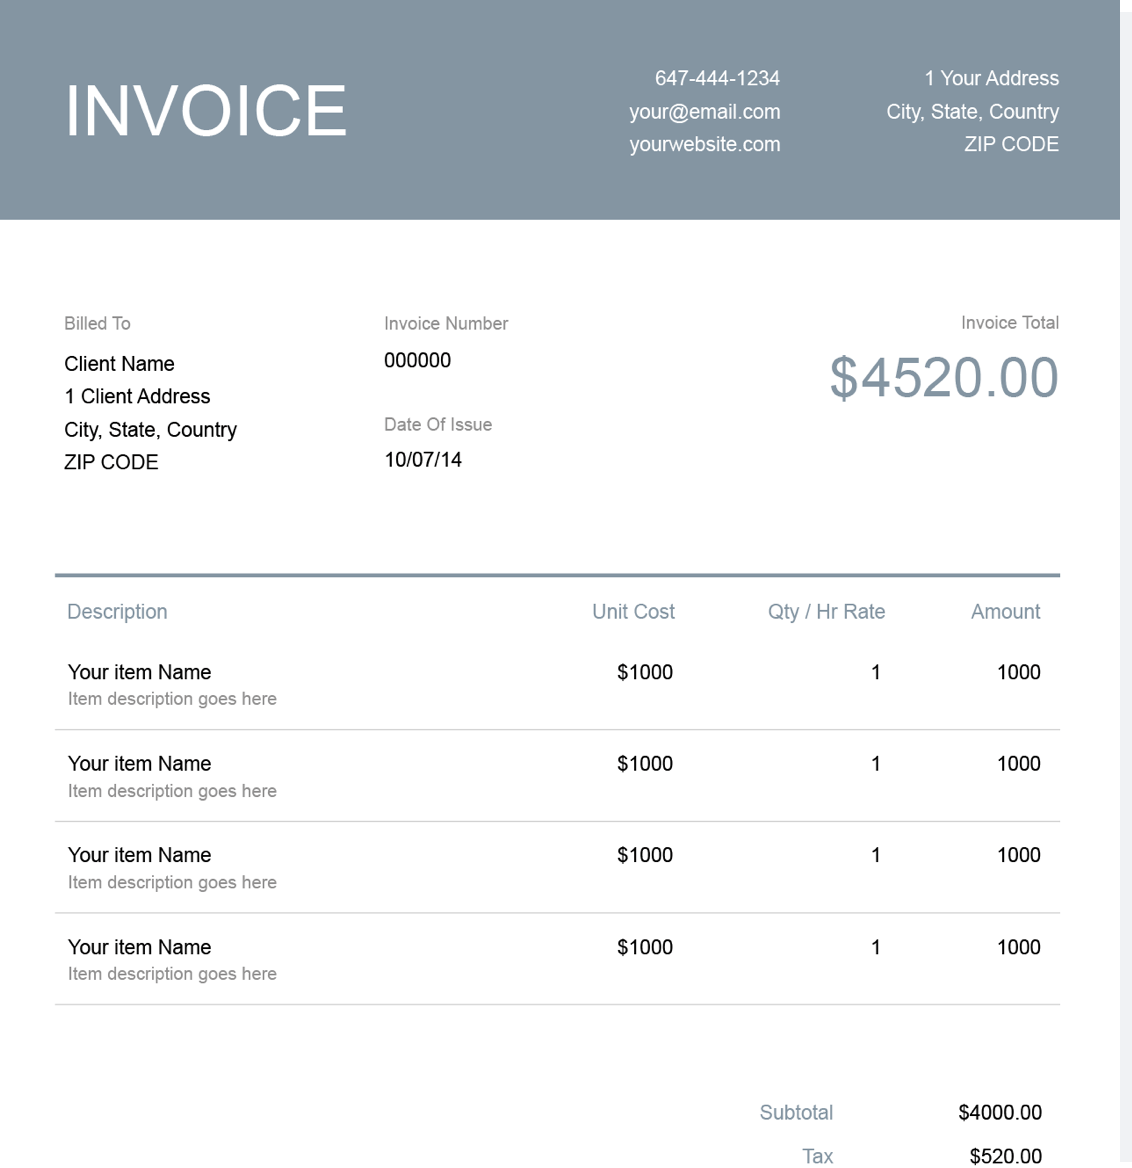 Example of a simple invoice